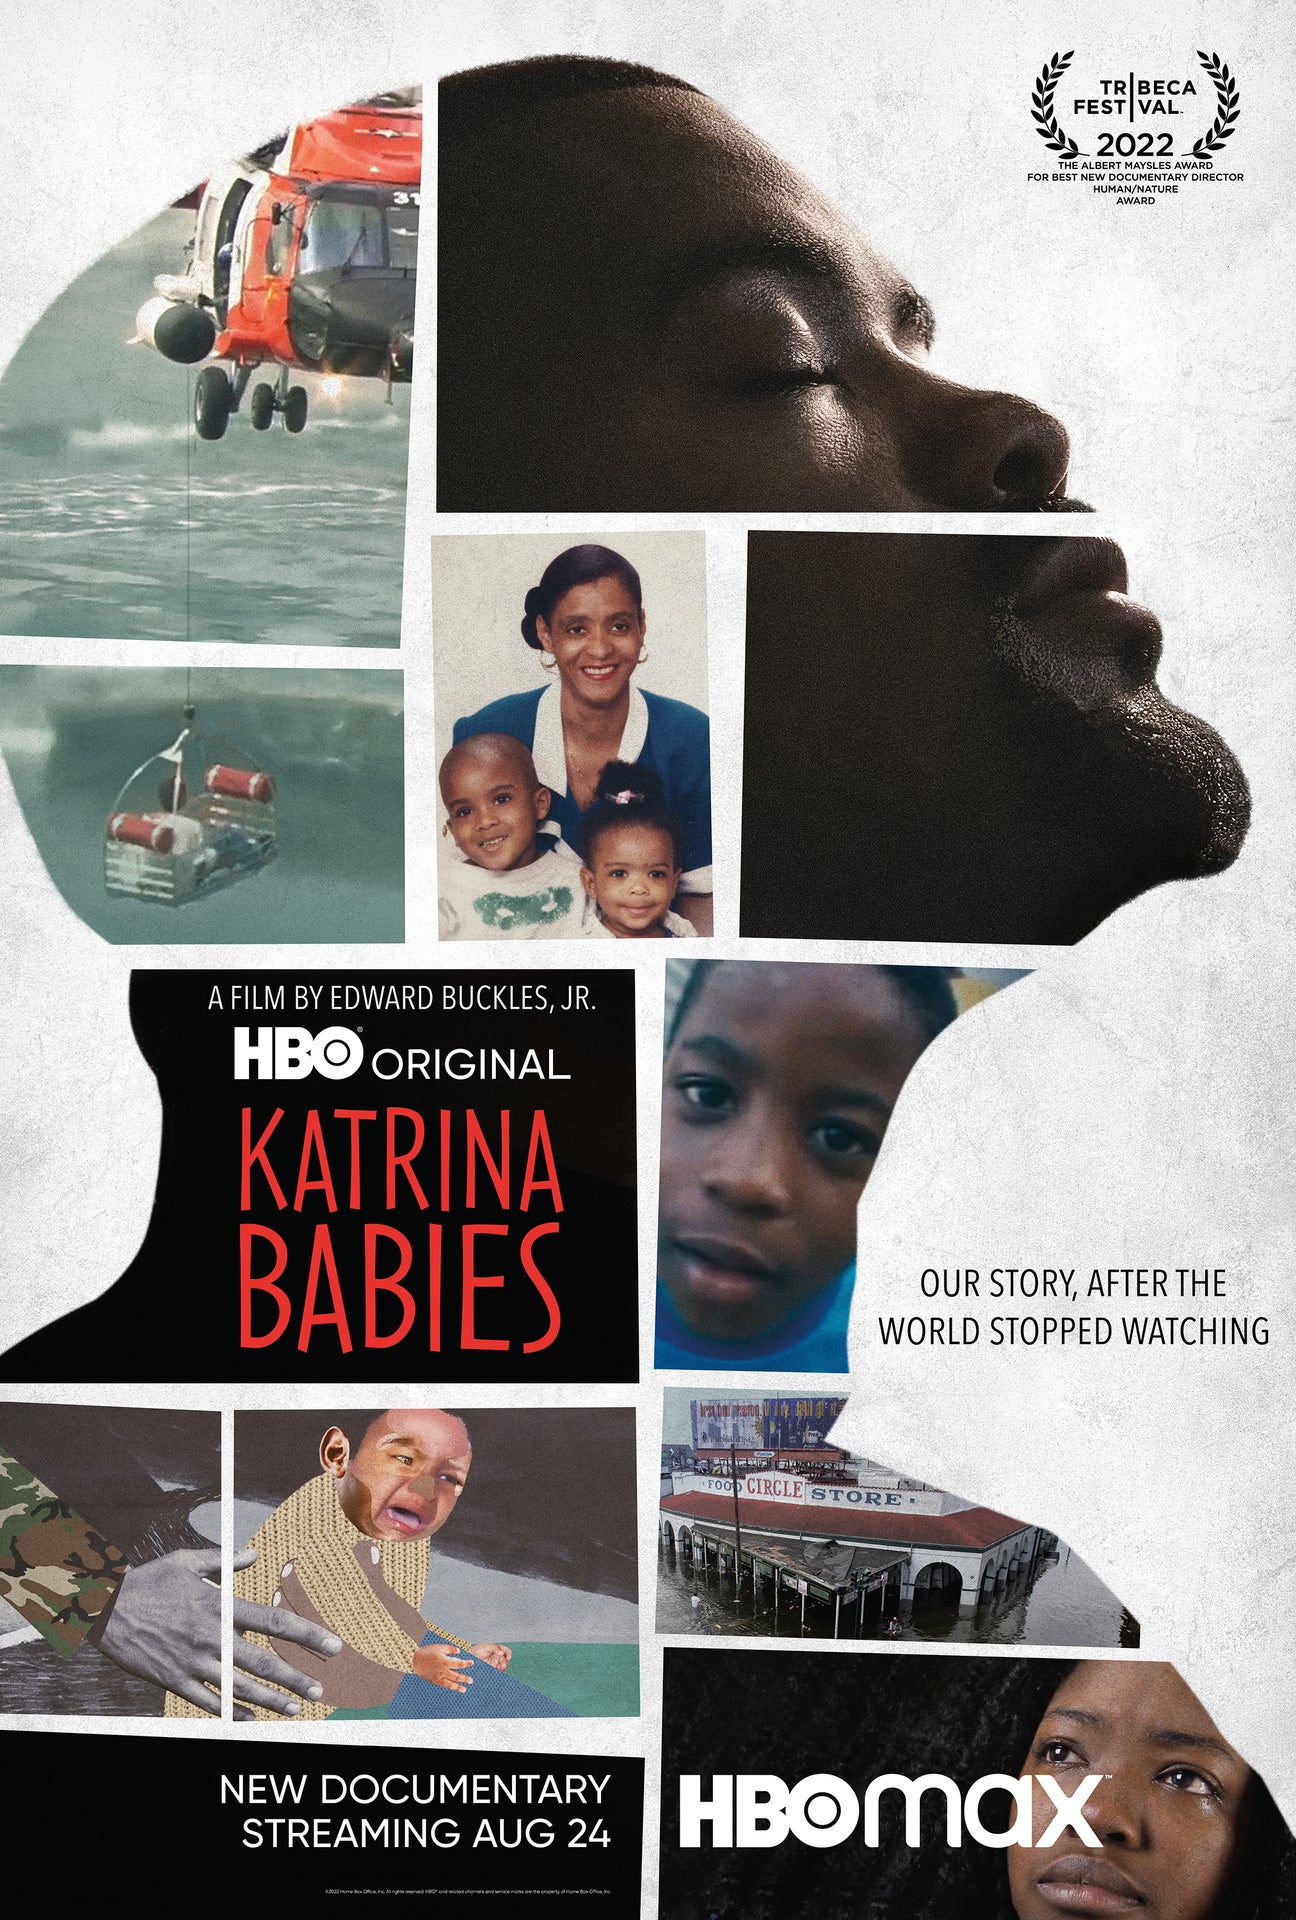 HBO’s ‘Katrina Babies’ Is An Exploration Of Trauma And The Difficult Process Towards Healing